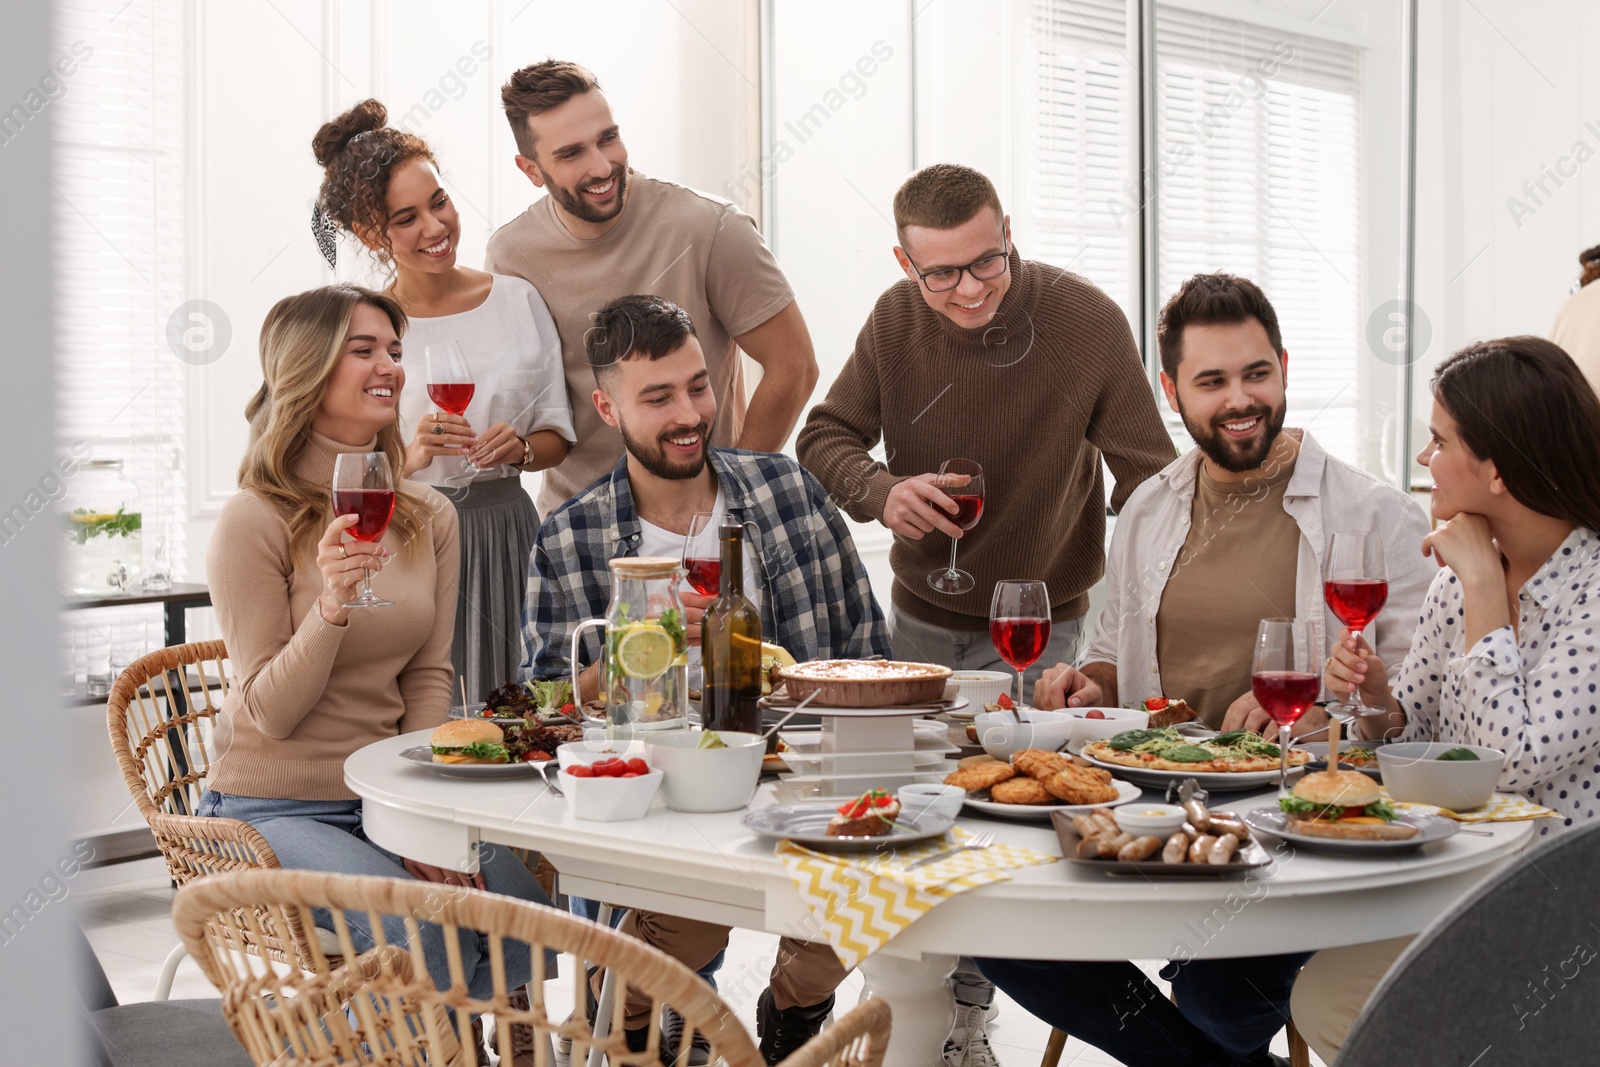 Photo of Group of people having brunch together indoors